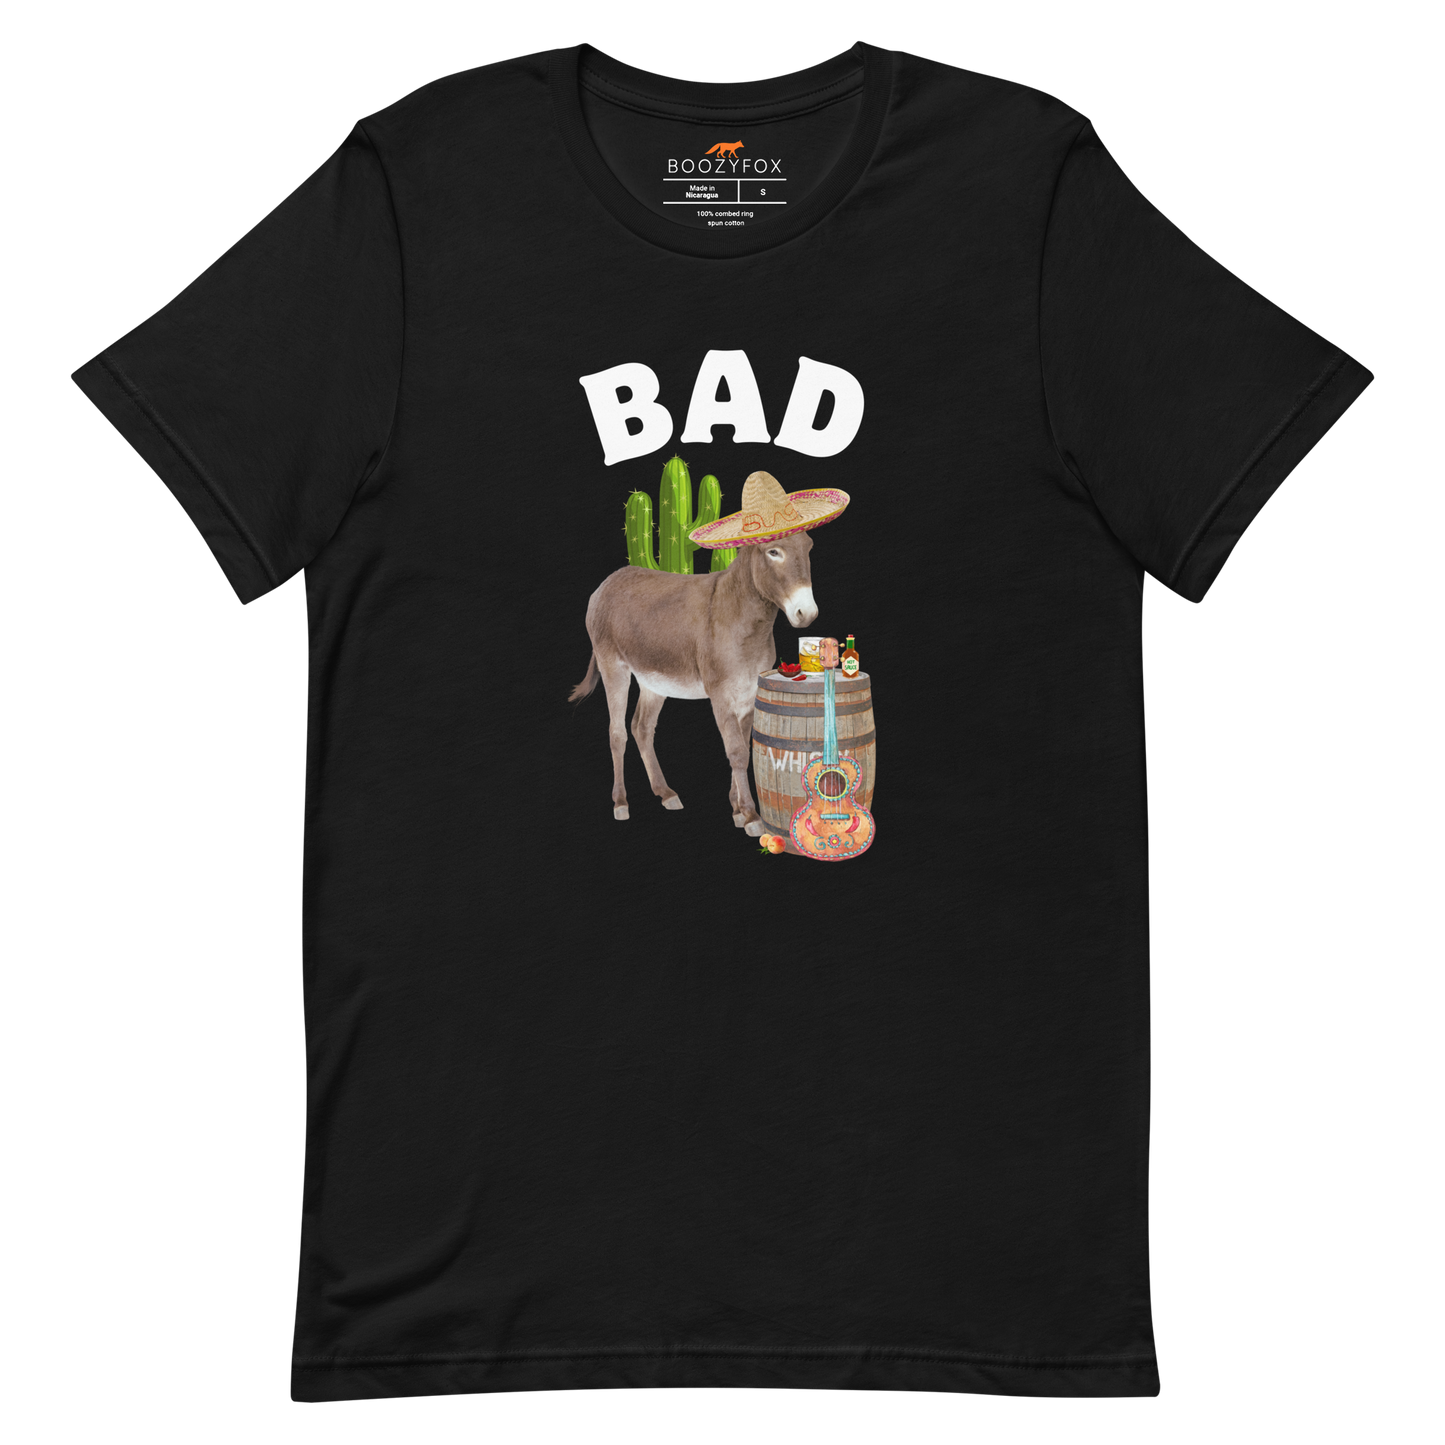 Black Premium Donkey Tee featuring a Funny Bad Ass Donkey graphic on the chest - Funny Graphic Bad Ass Donkey Tees - Boozy Fox